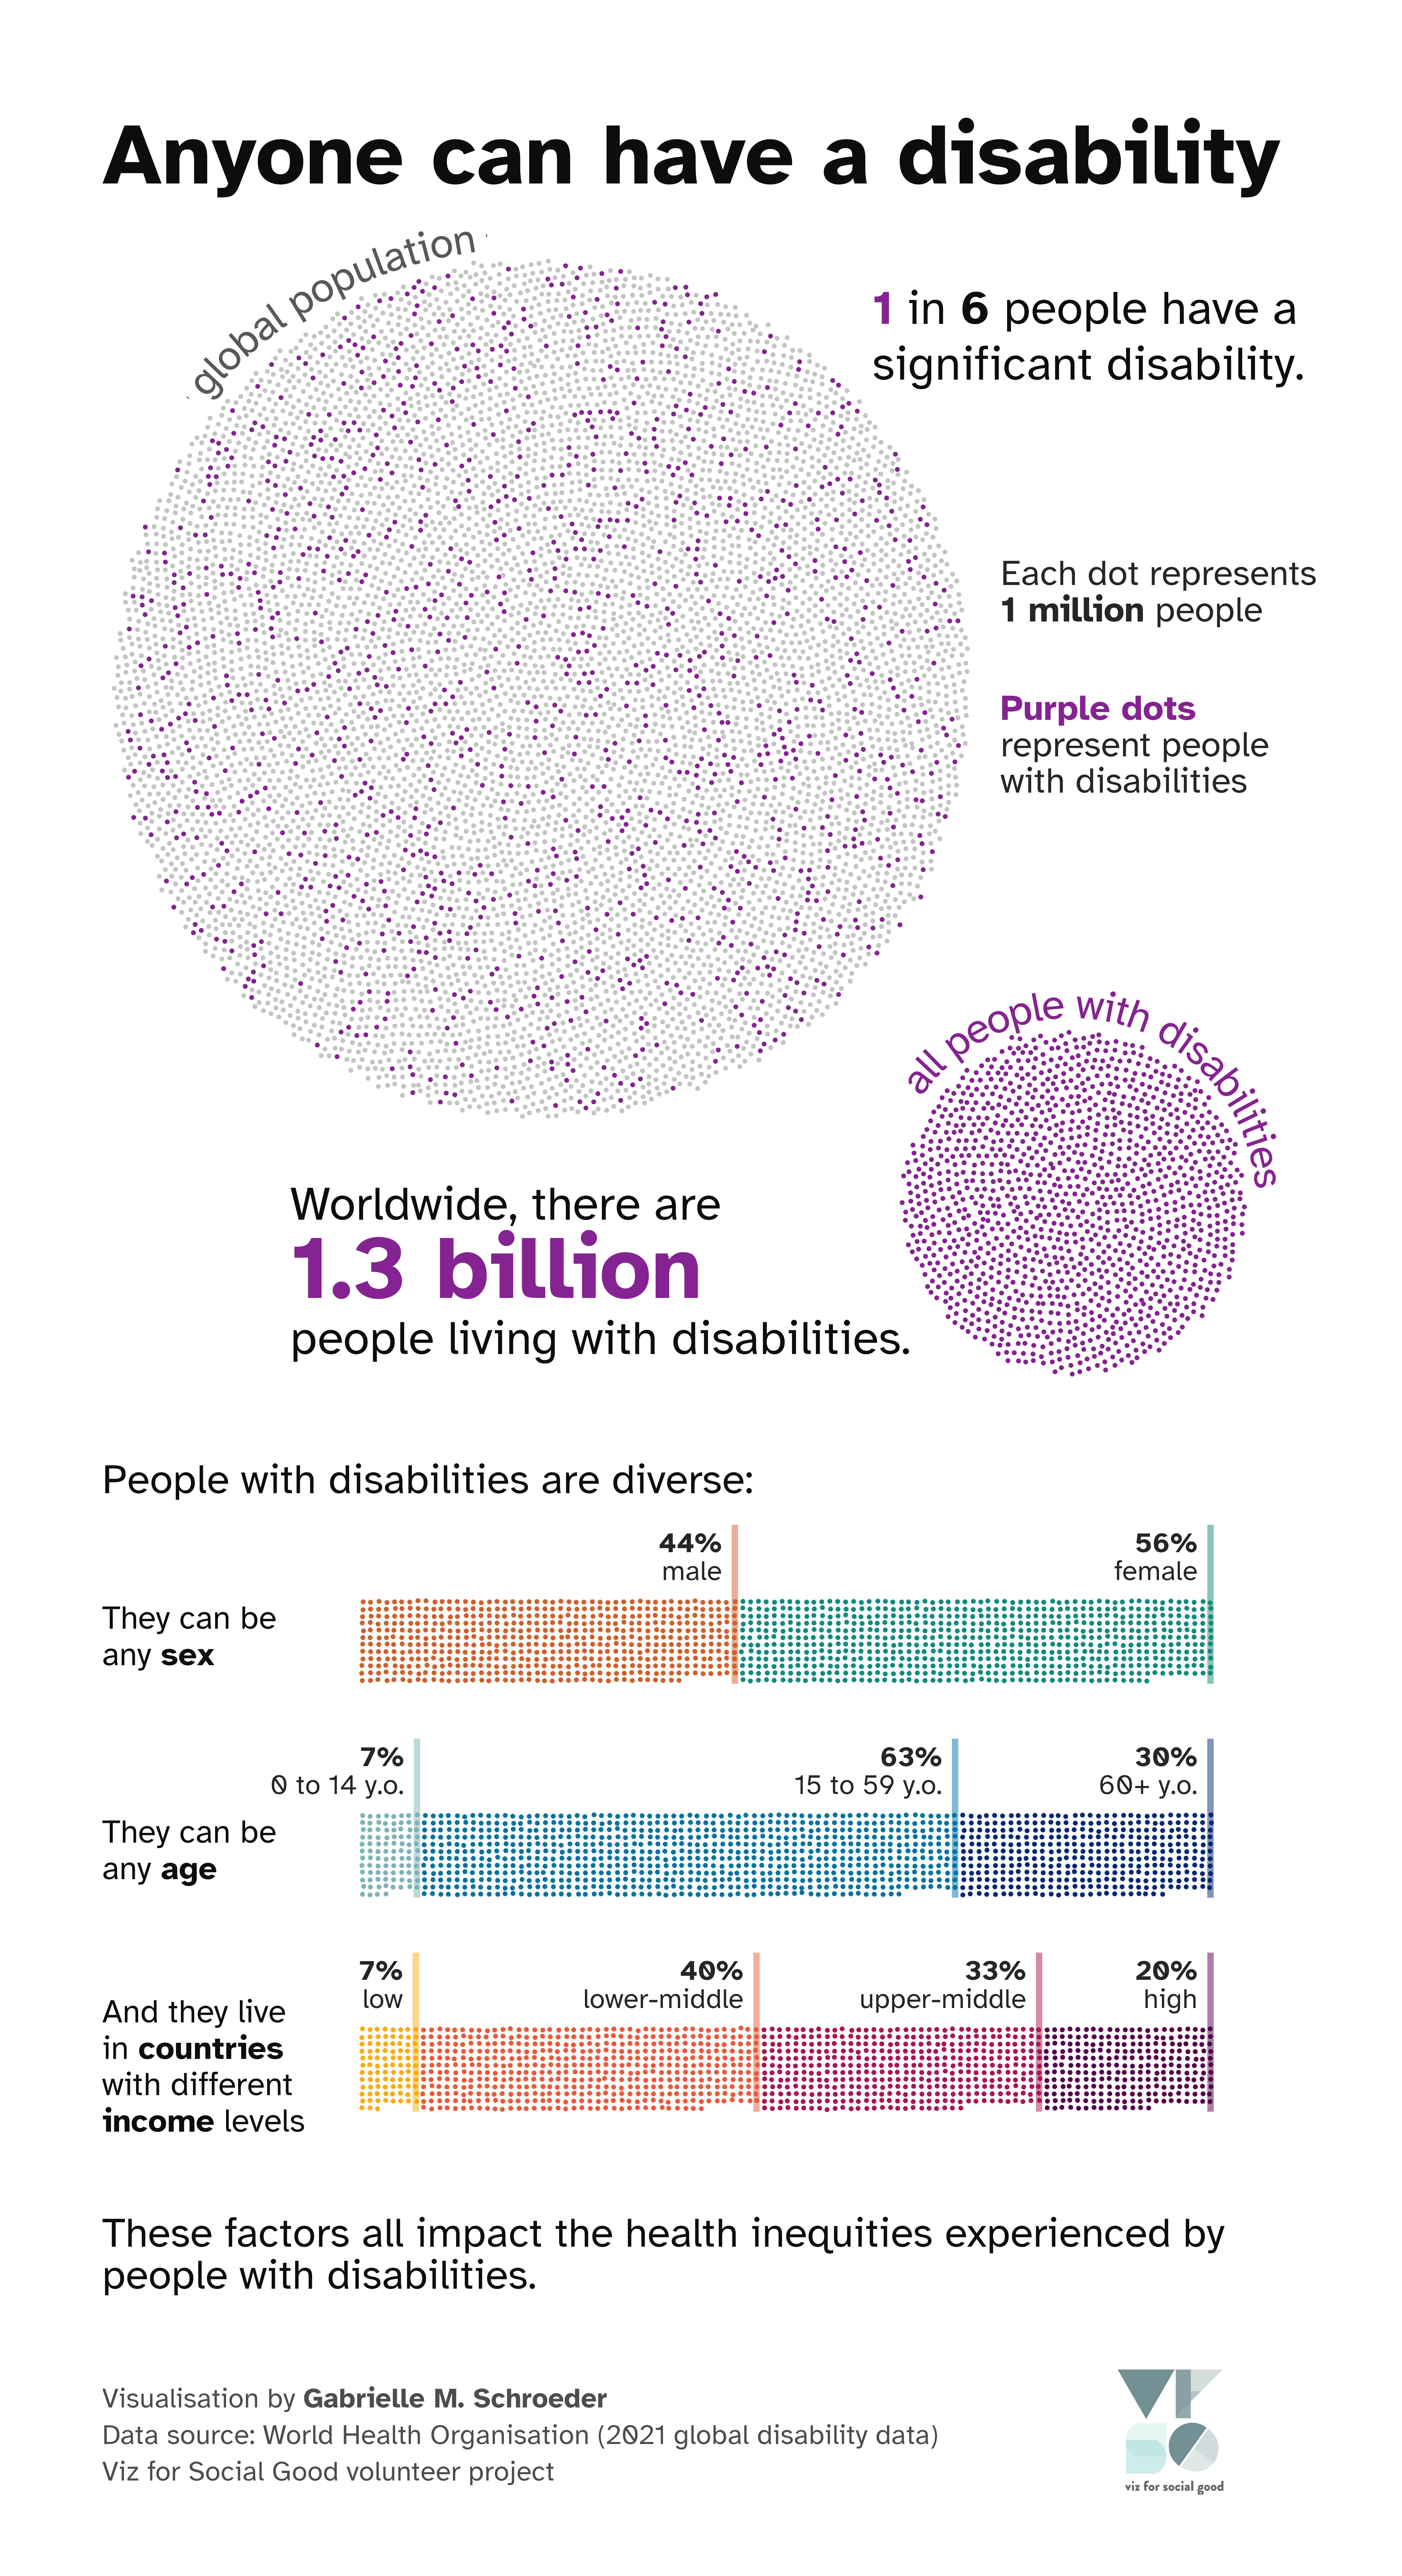 A visualisation that represents every 1 million people in the world with one dot to show that 1 in 6 people, or 1.3 billion people worldwide, have a significant disability. To show the diversity of people with disabilities, the dots are rearranged into three stacked bar charts that provide sex, age, and country income level demographics.